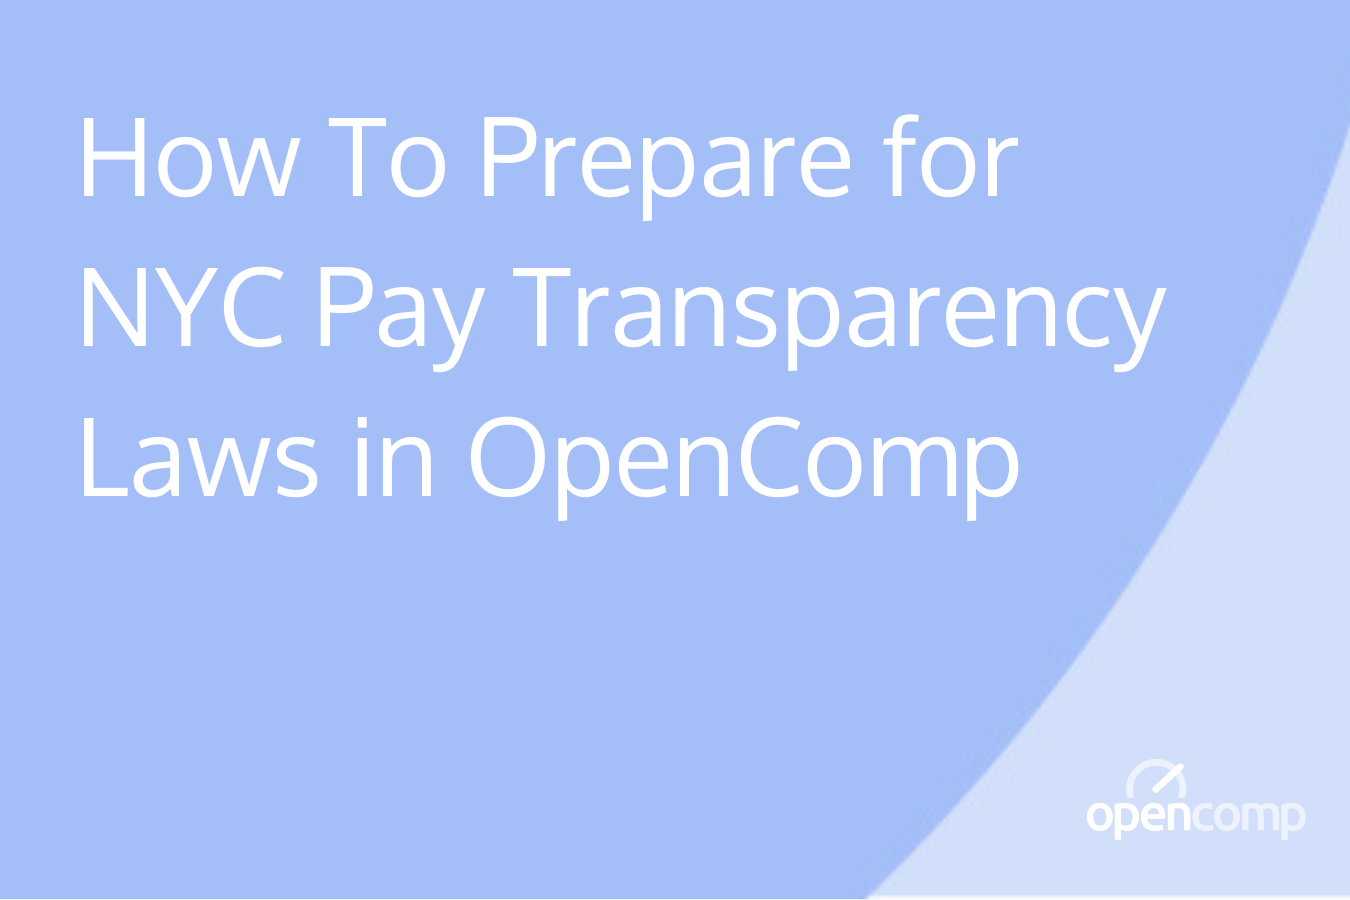 How To Prepare for NYC Pay Transparency Laws in OpenComp-1